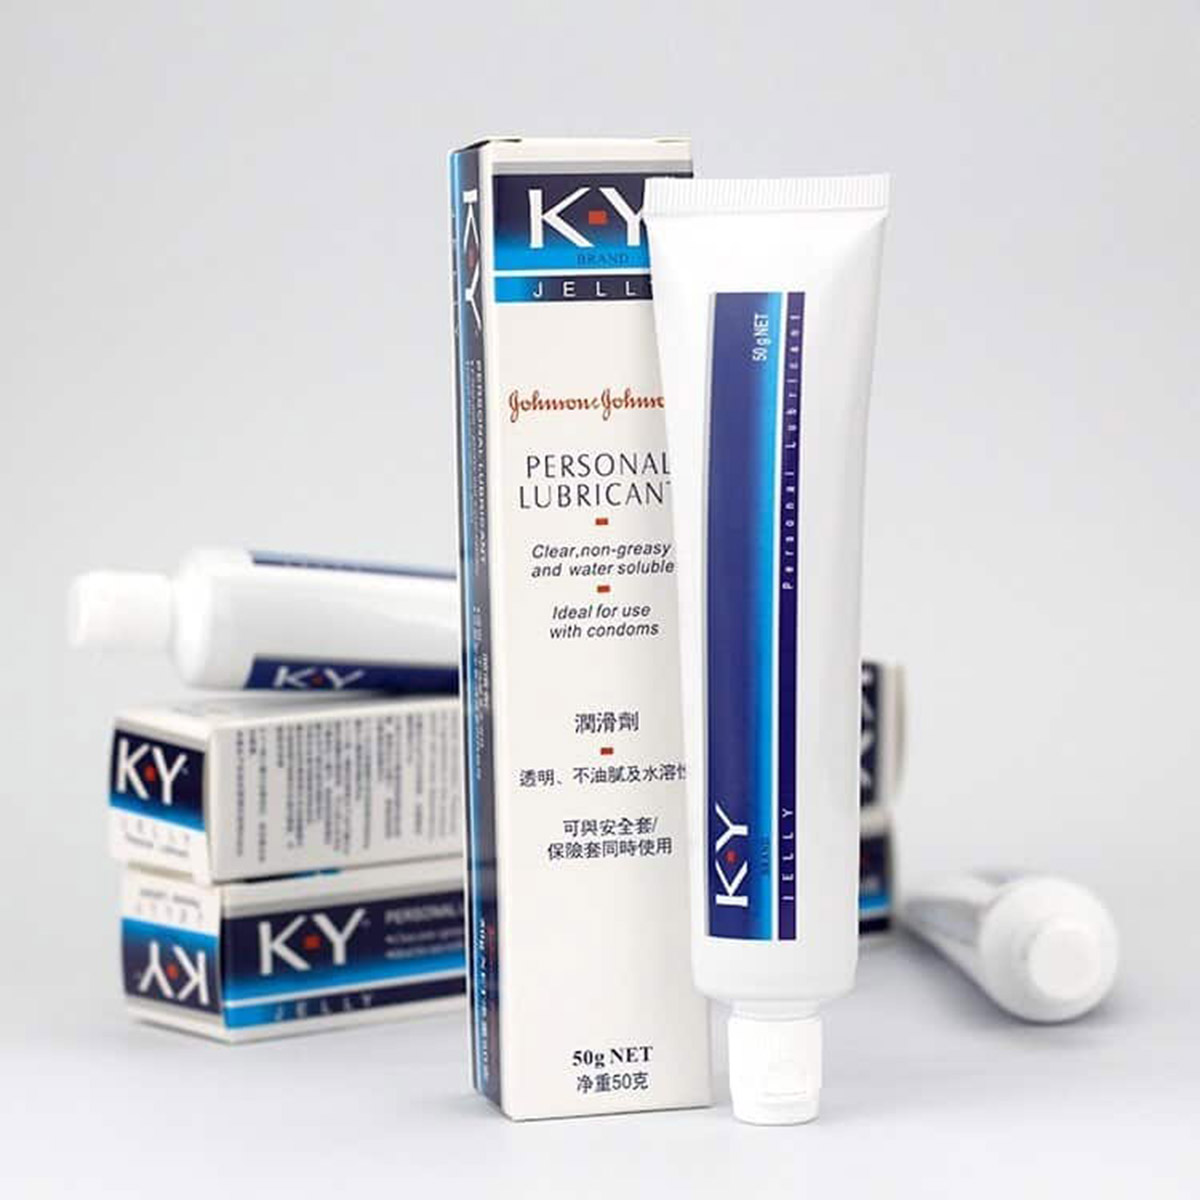 KY Jelly - Personal Lubricant (2Piece)